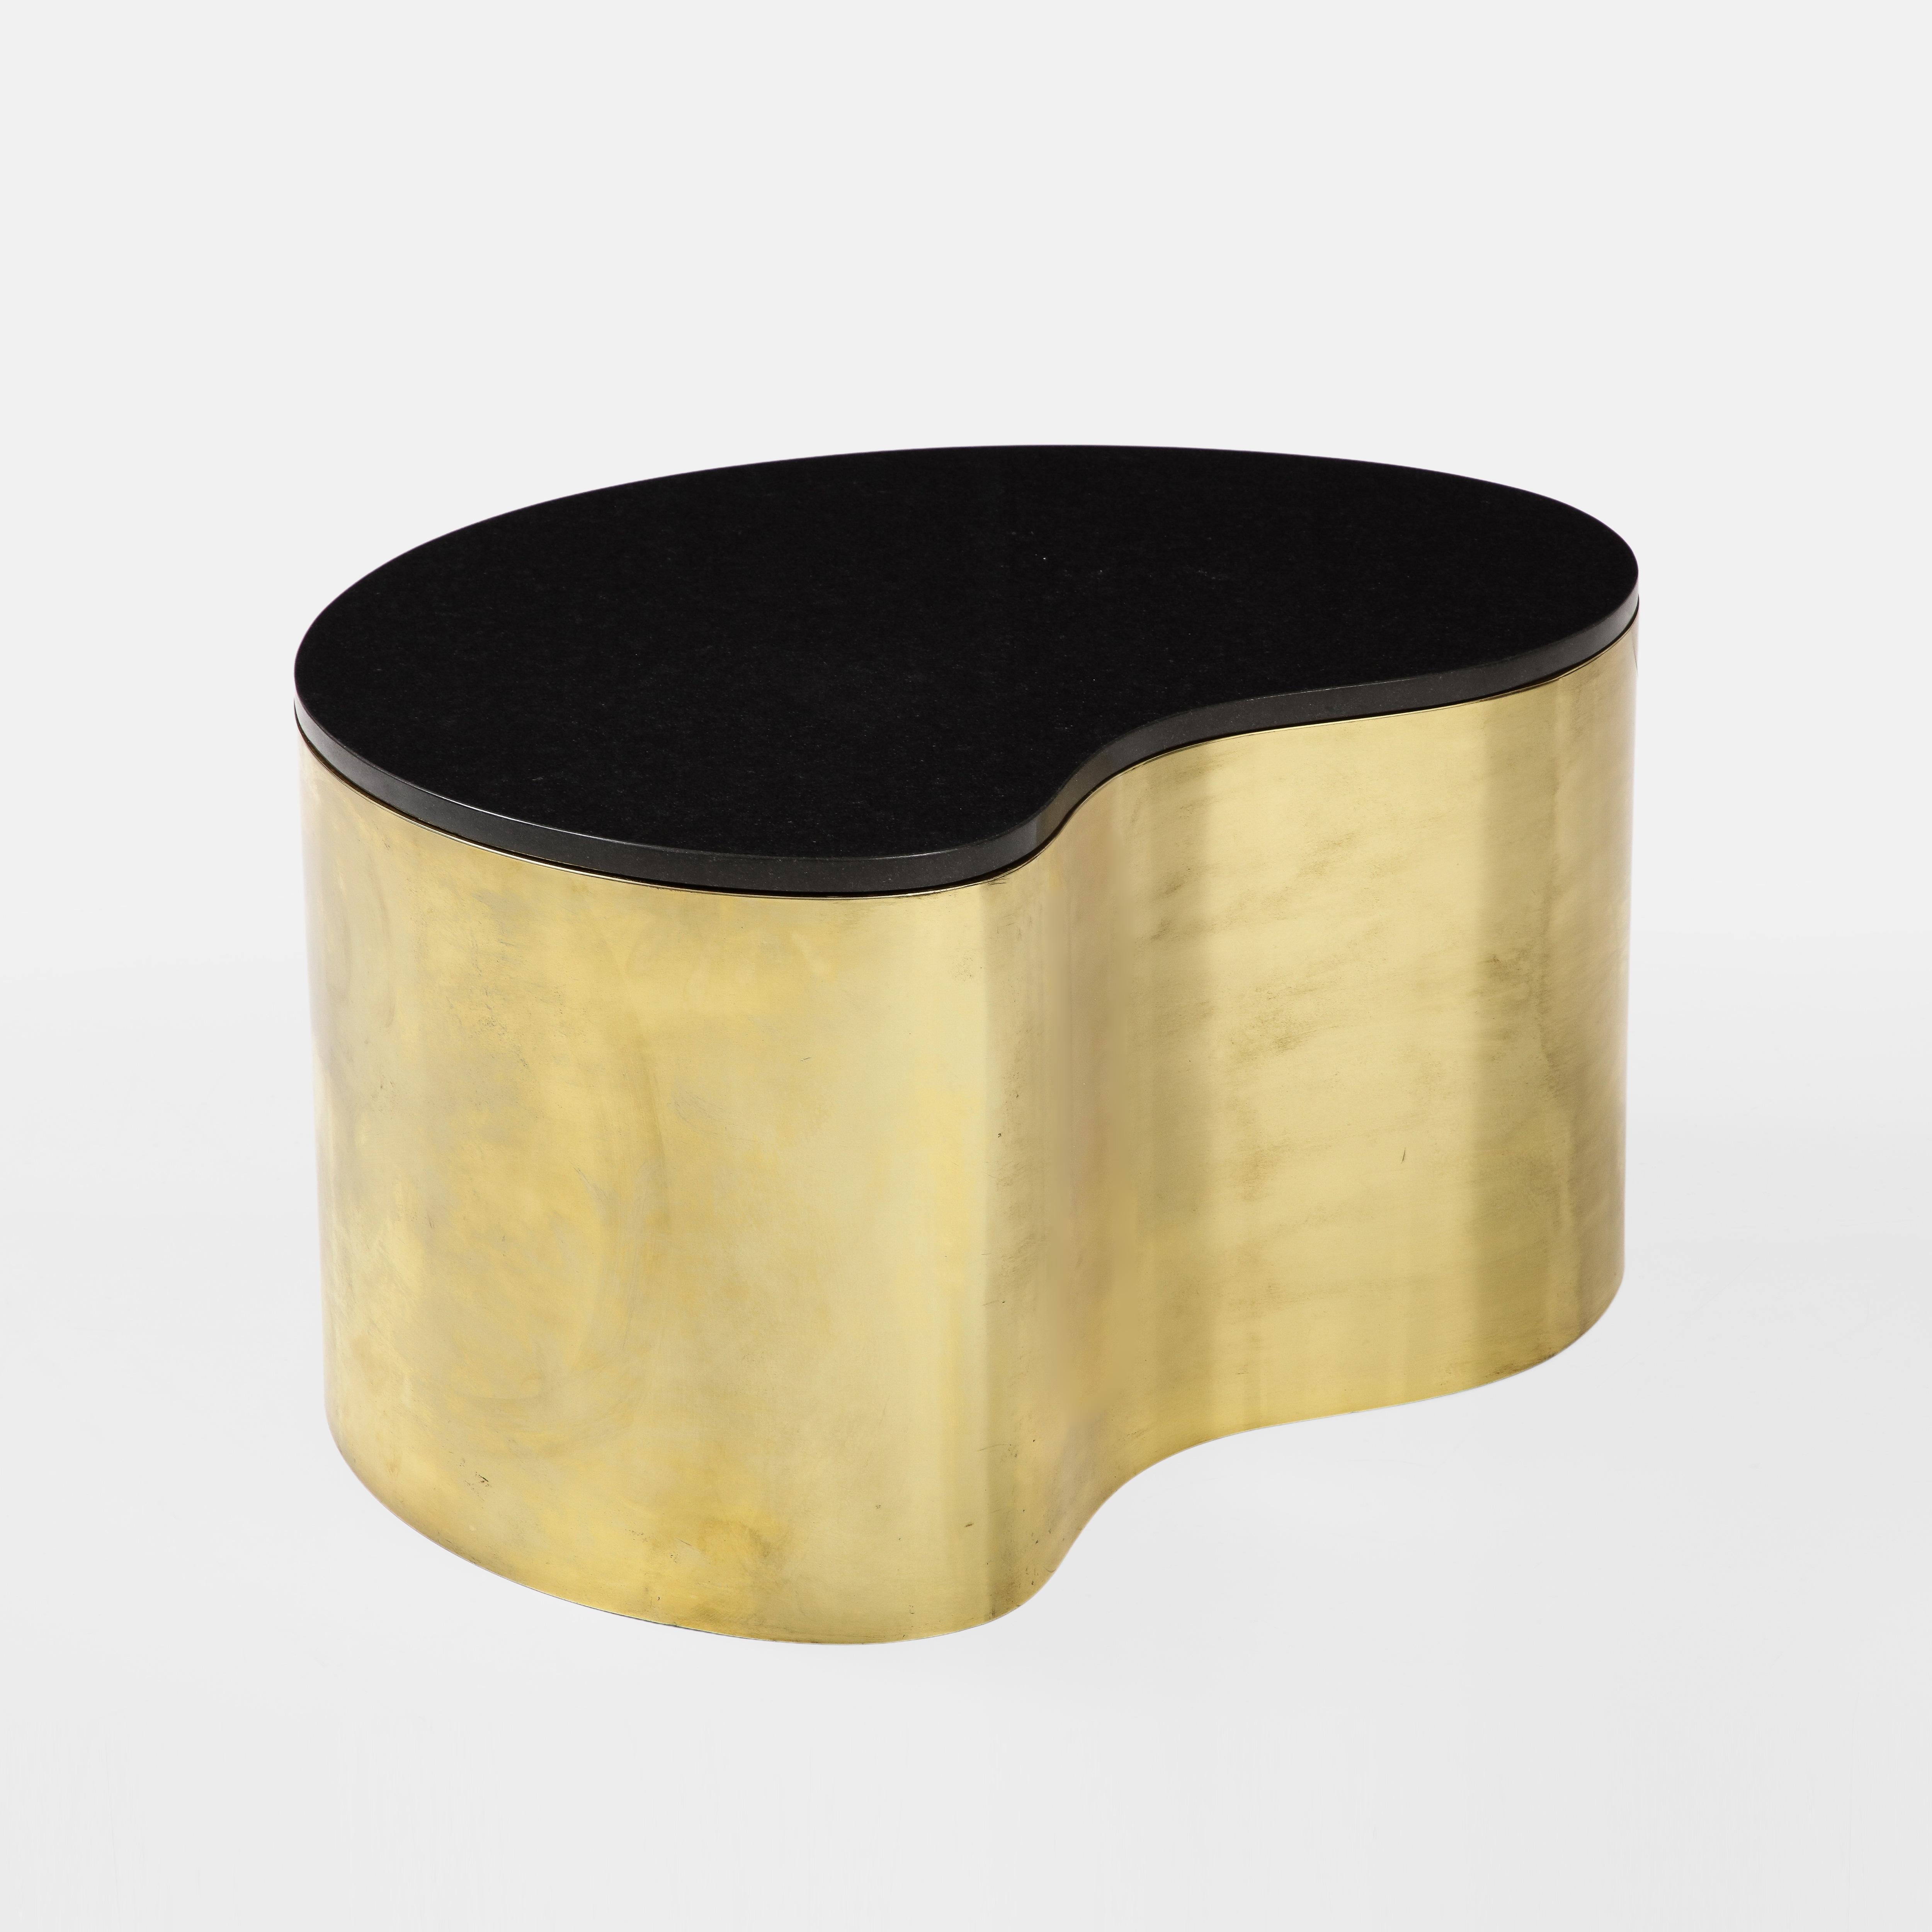 Karl Springer Freeform Coffee Table in Brass and Black Granite Top, 1970s For Sale 2